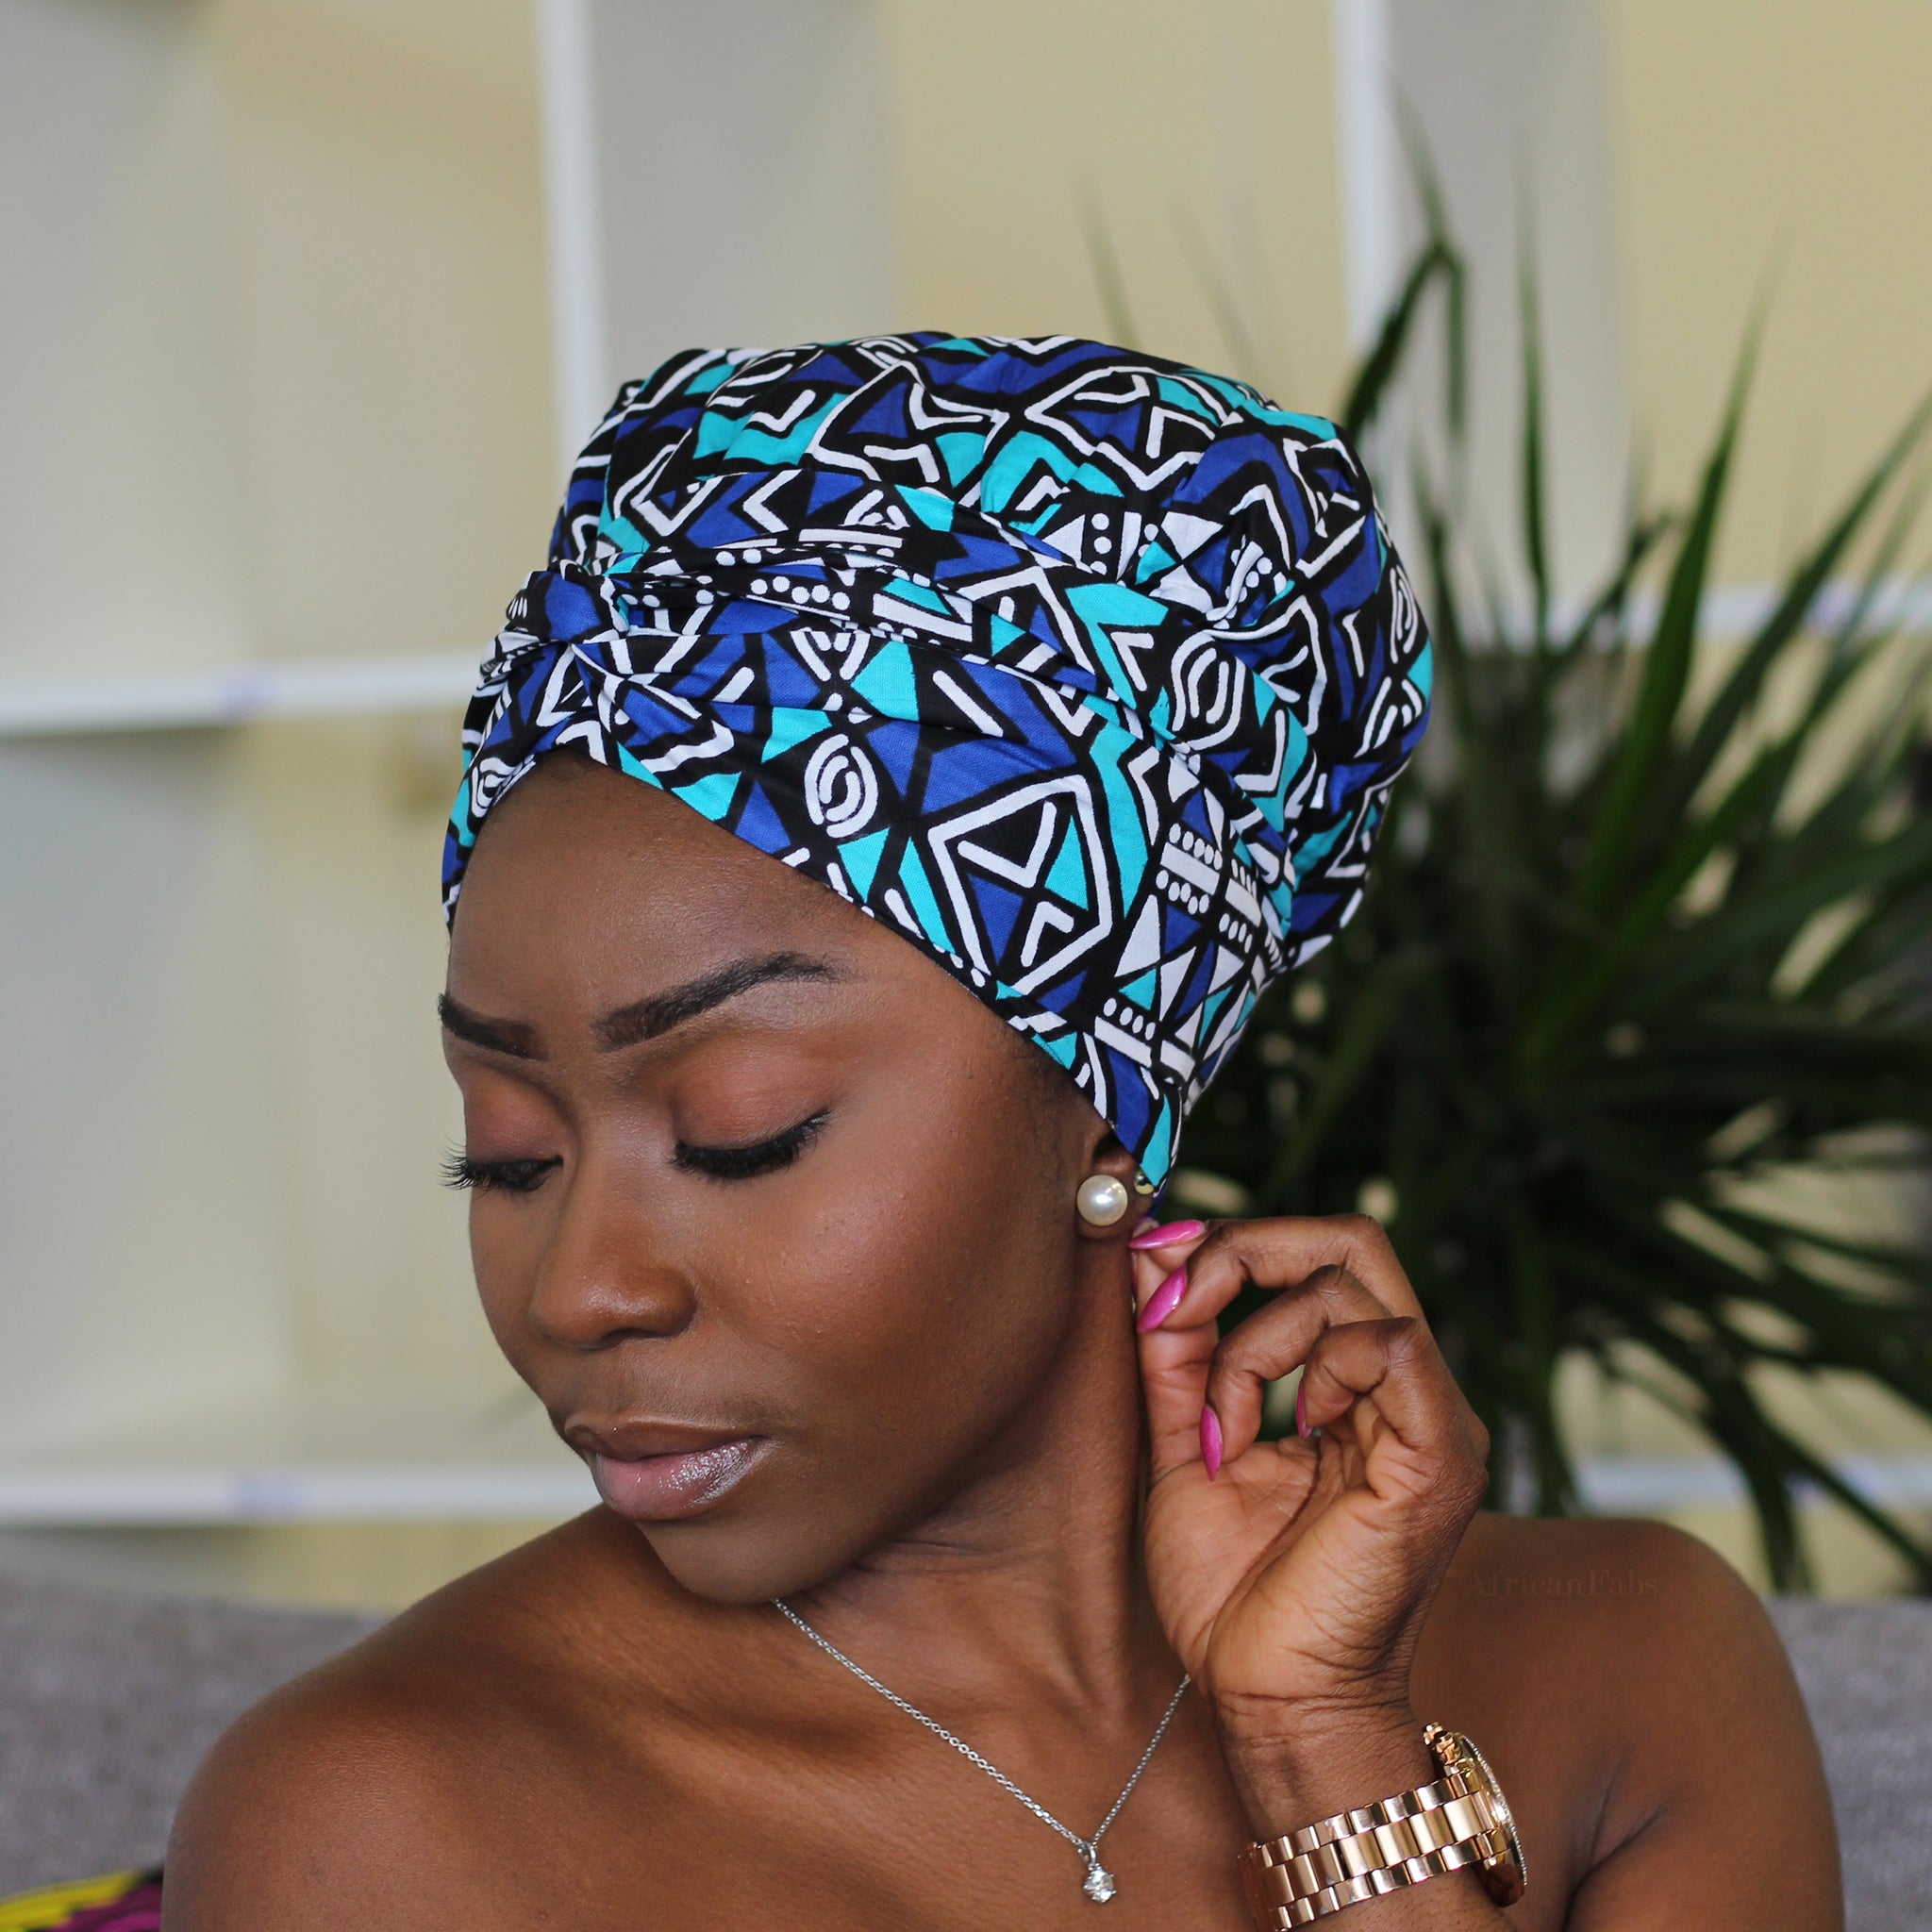 Easy headwrap - Satin lined hair bonnet - Blue / turquoise Ame